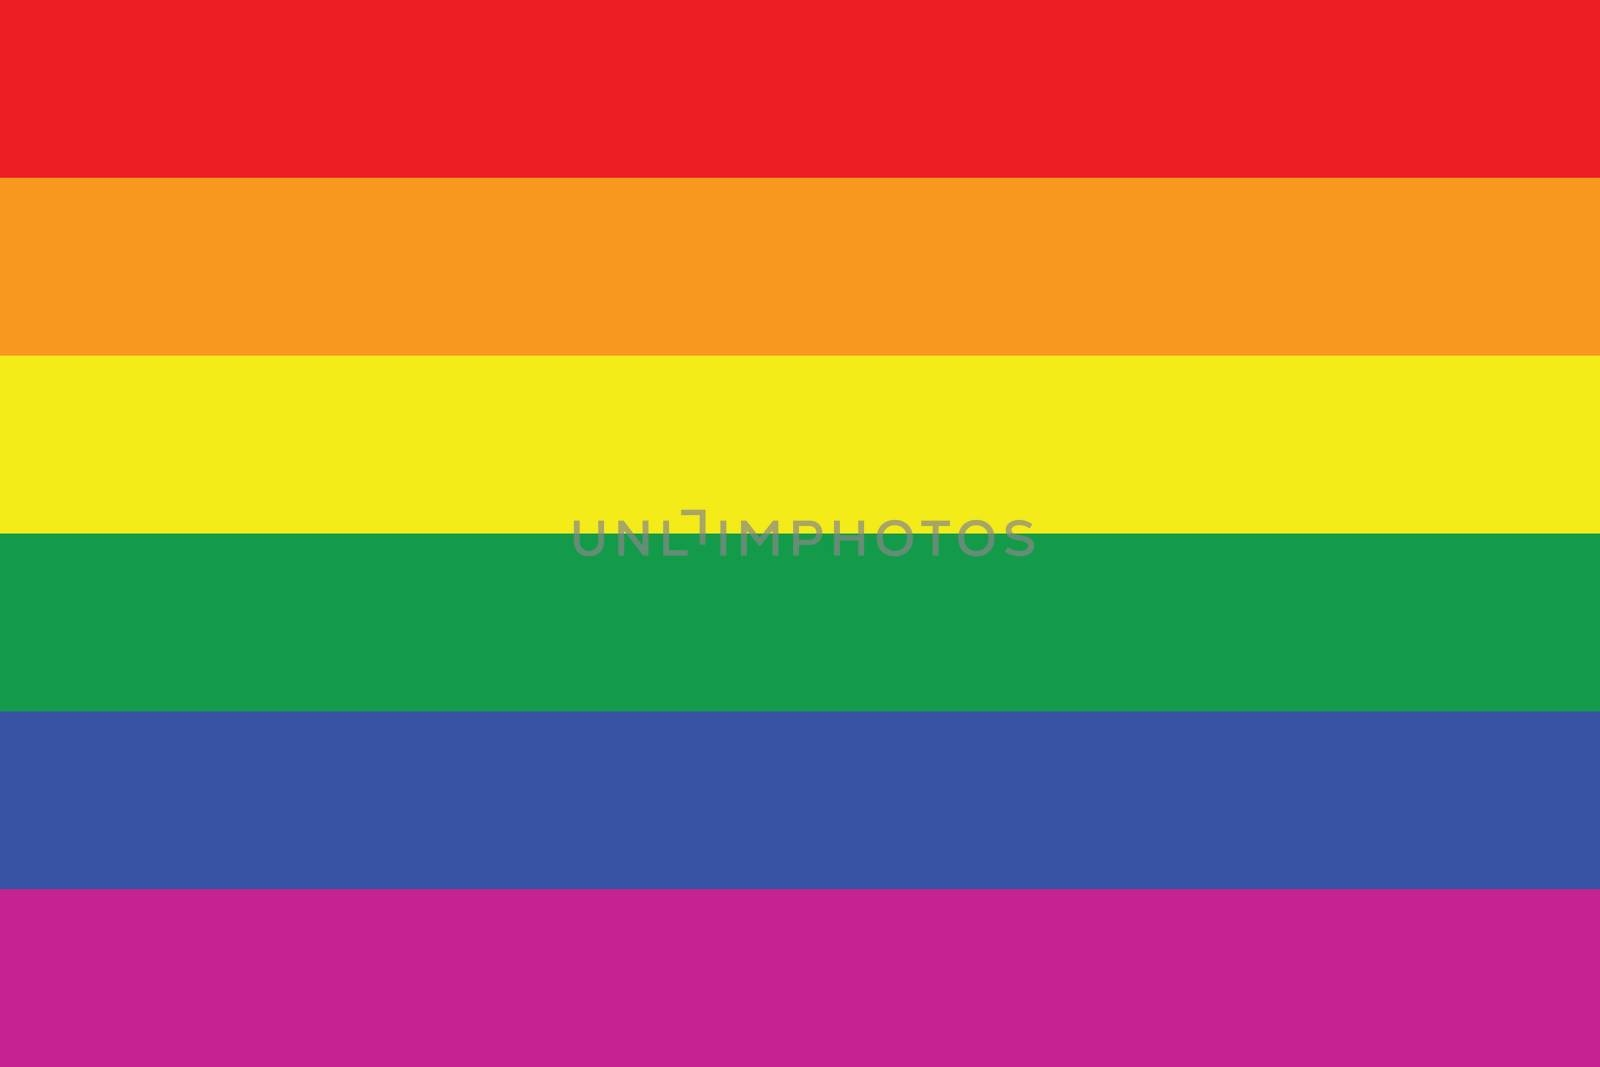 An Illustration of Gay flag or LGBT flag sign isolated. Gay culture symbol